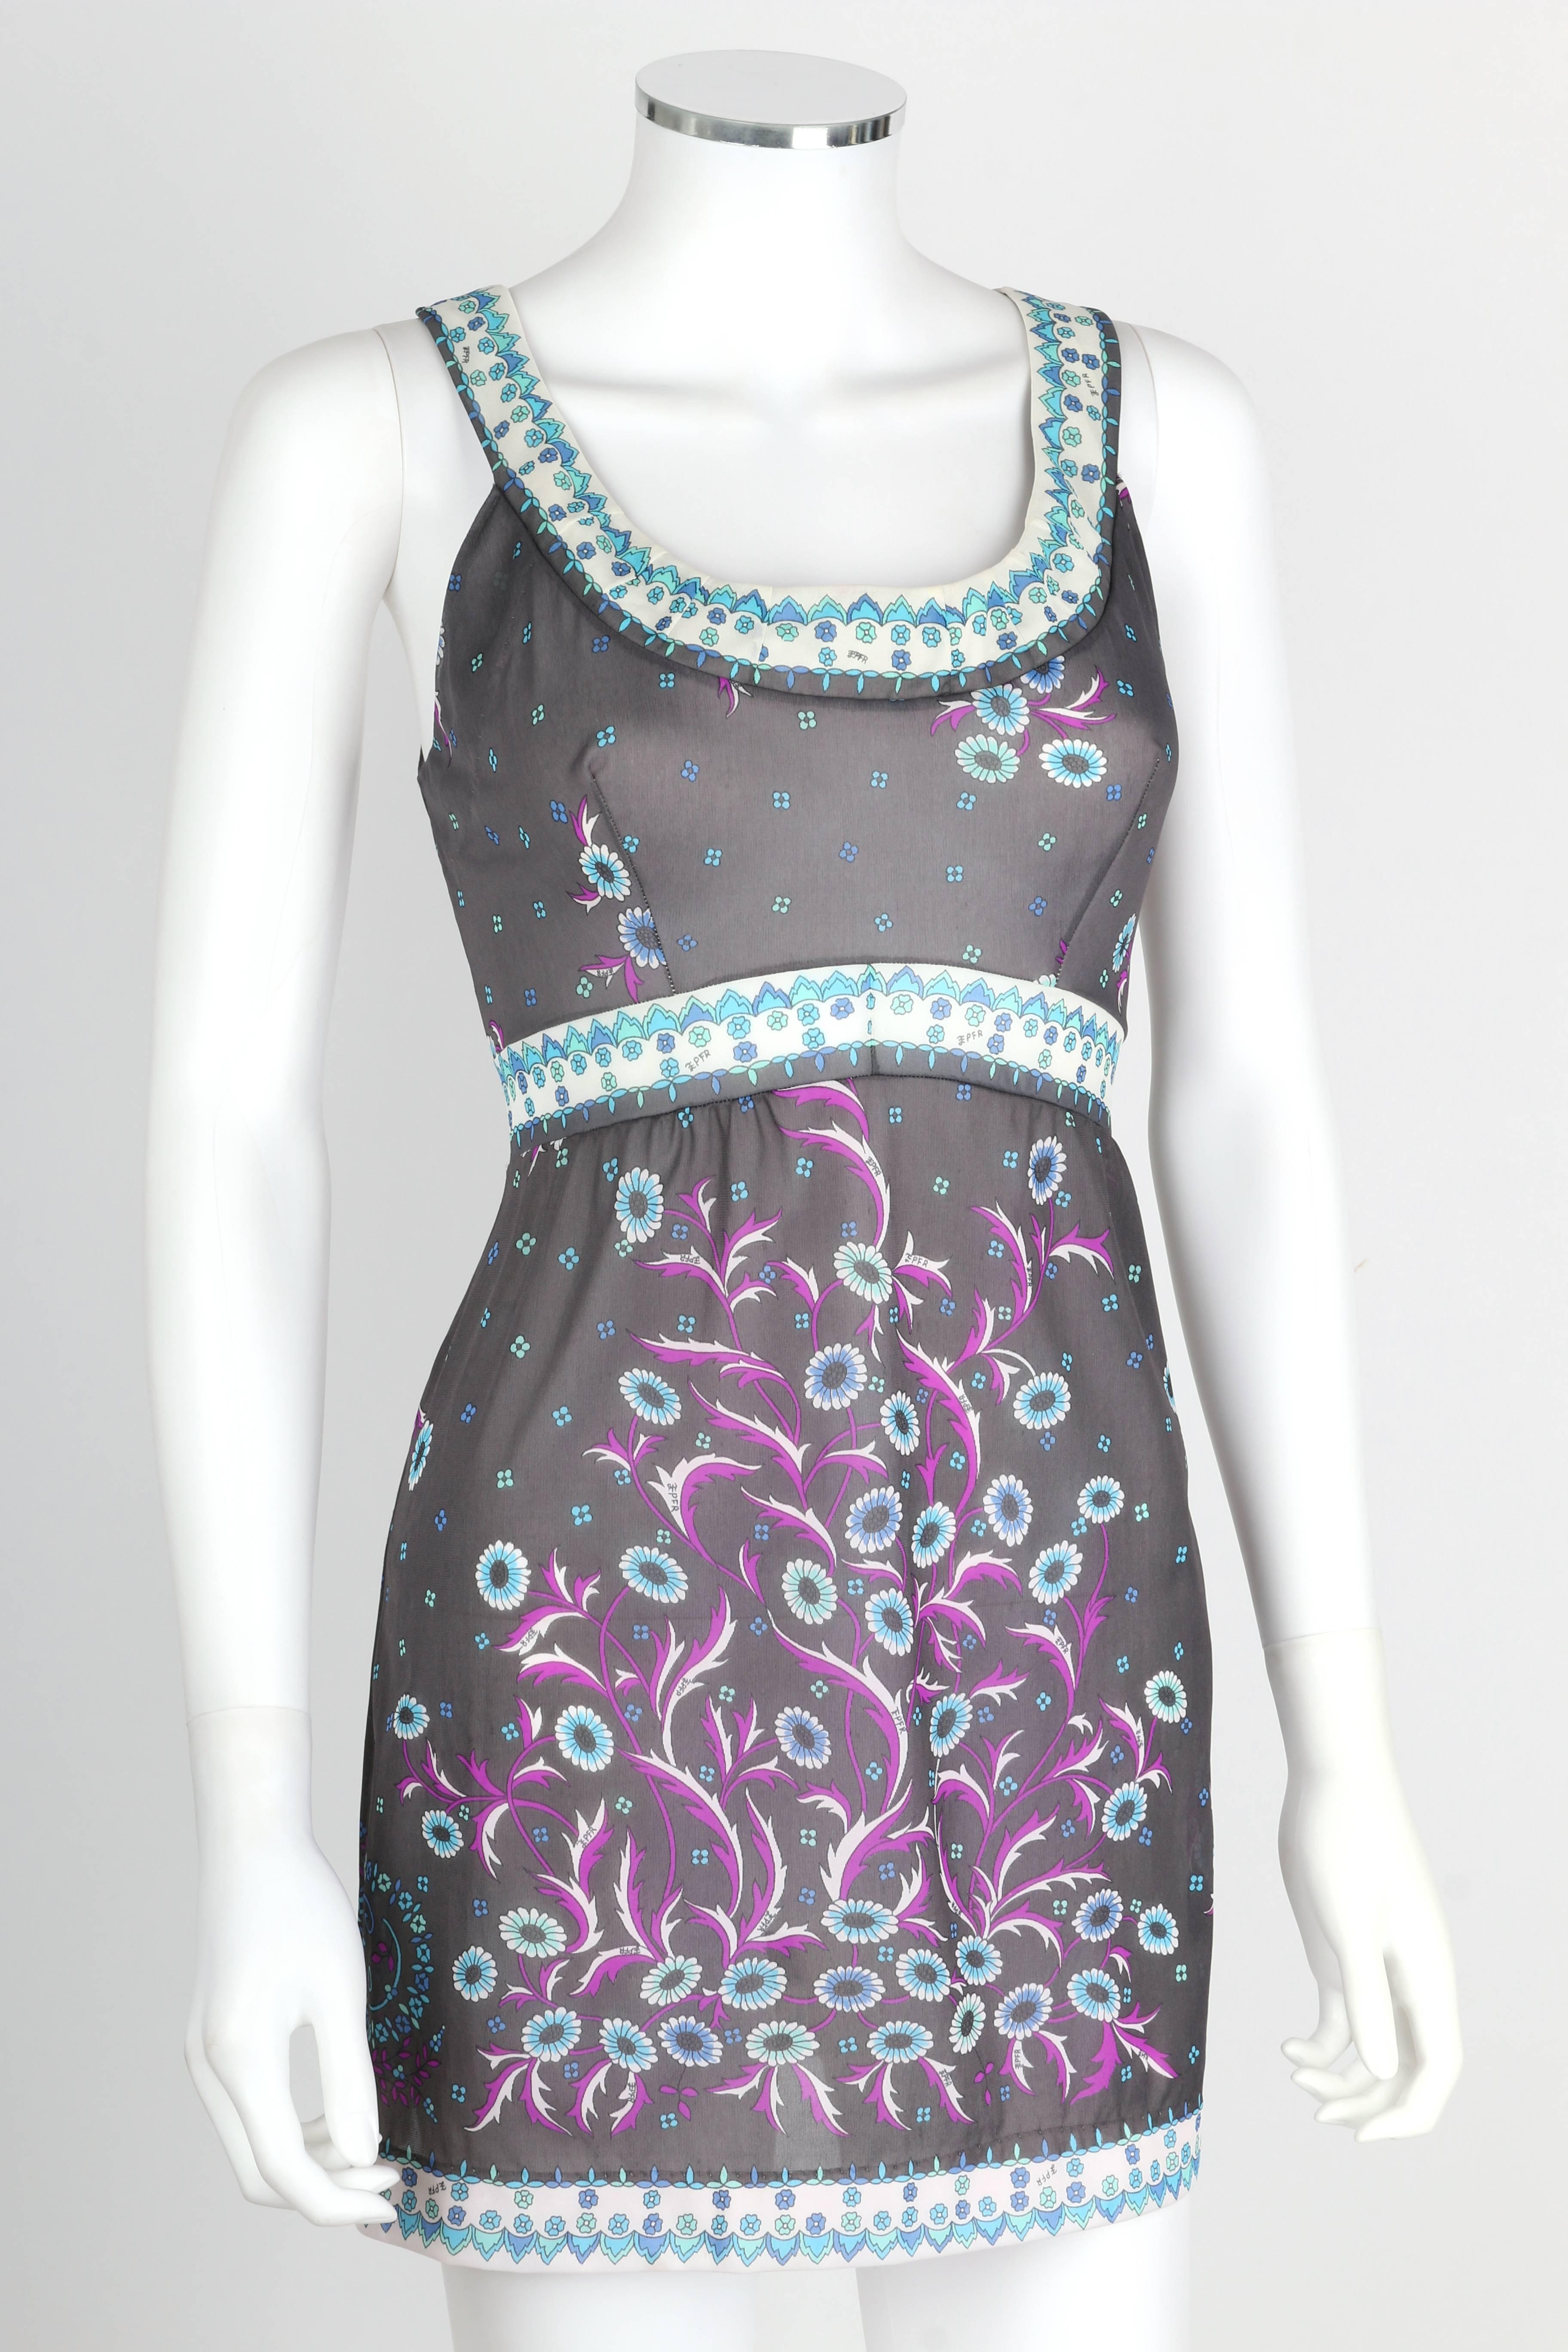 Vintage c.1960's Emilio Pucci for Formfit Rogers floral print mini dress/tunic in shades of gray, purple, blue and white. Sleeveless. Empire waistline. Rounded scoop neckline. Decorative floral border around neckline, waist, and hem. Slip-on style.